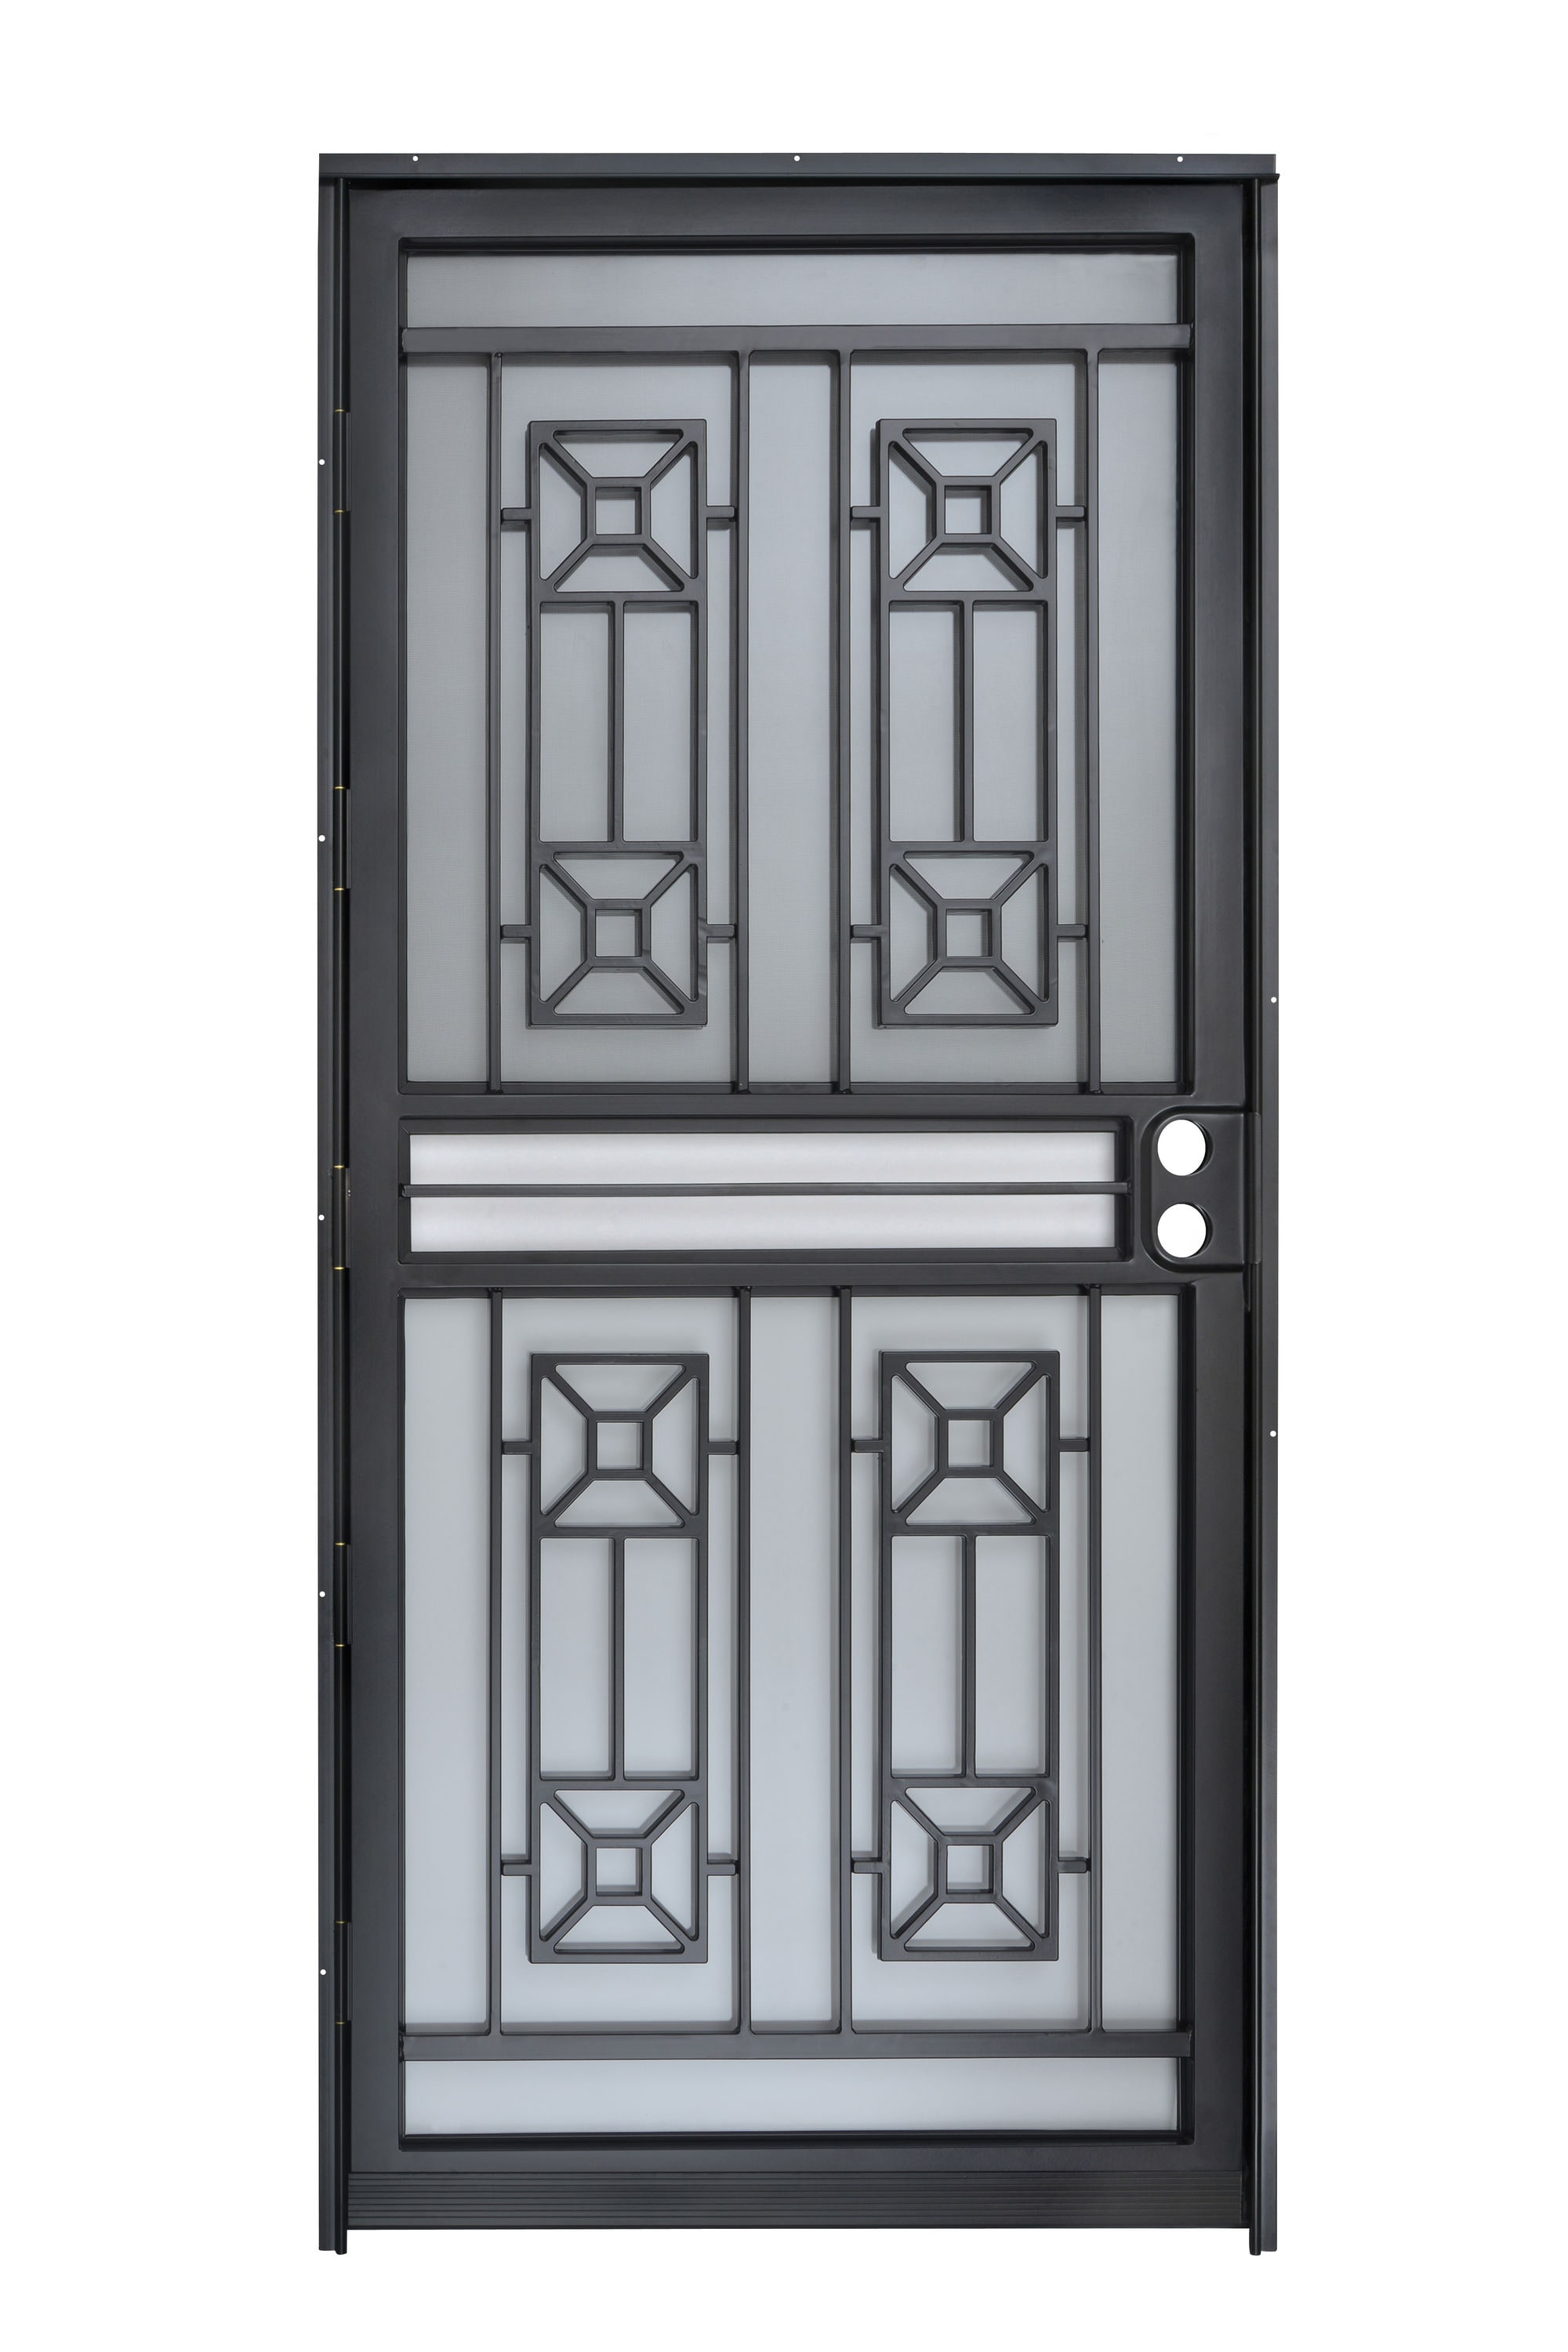 Matrix 36-in x 80-in Black Steel Recessed Mount Security Door with Charcoal Screen Tempered Glass Rubber | - Gatehouse LF617-36-BLK